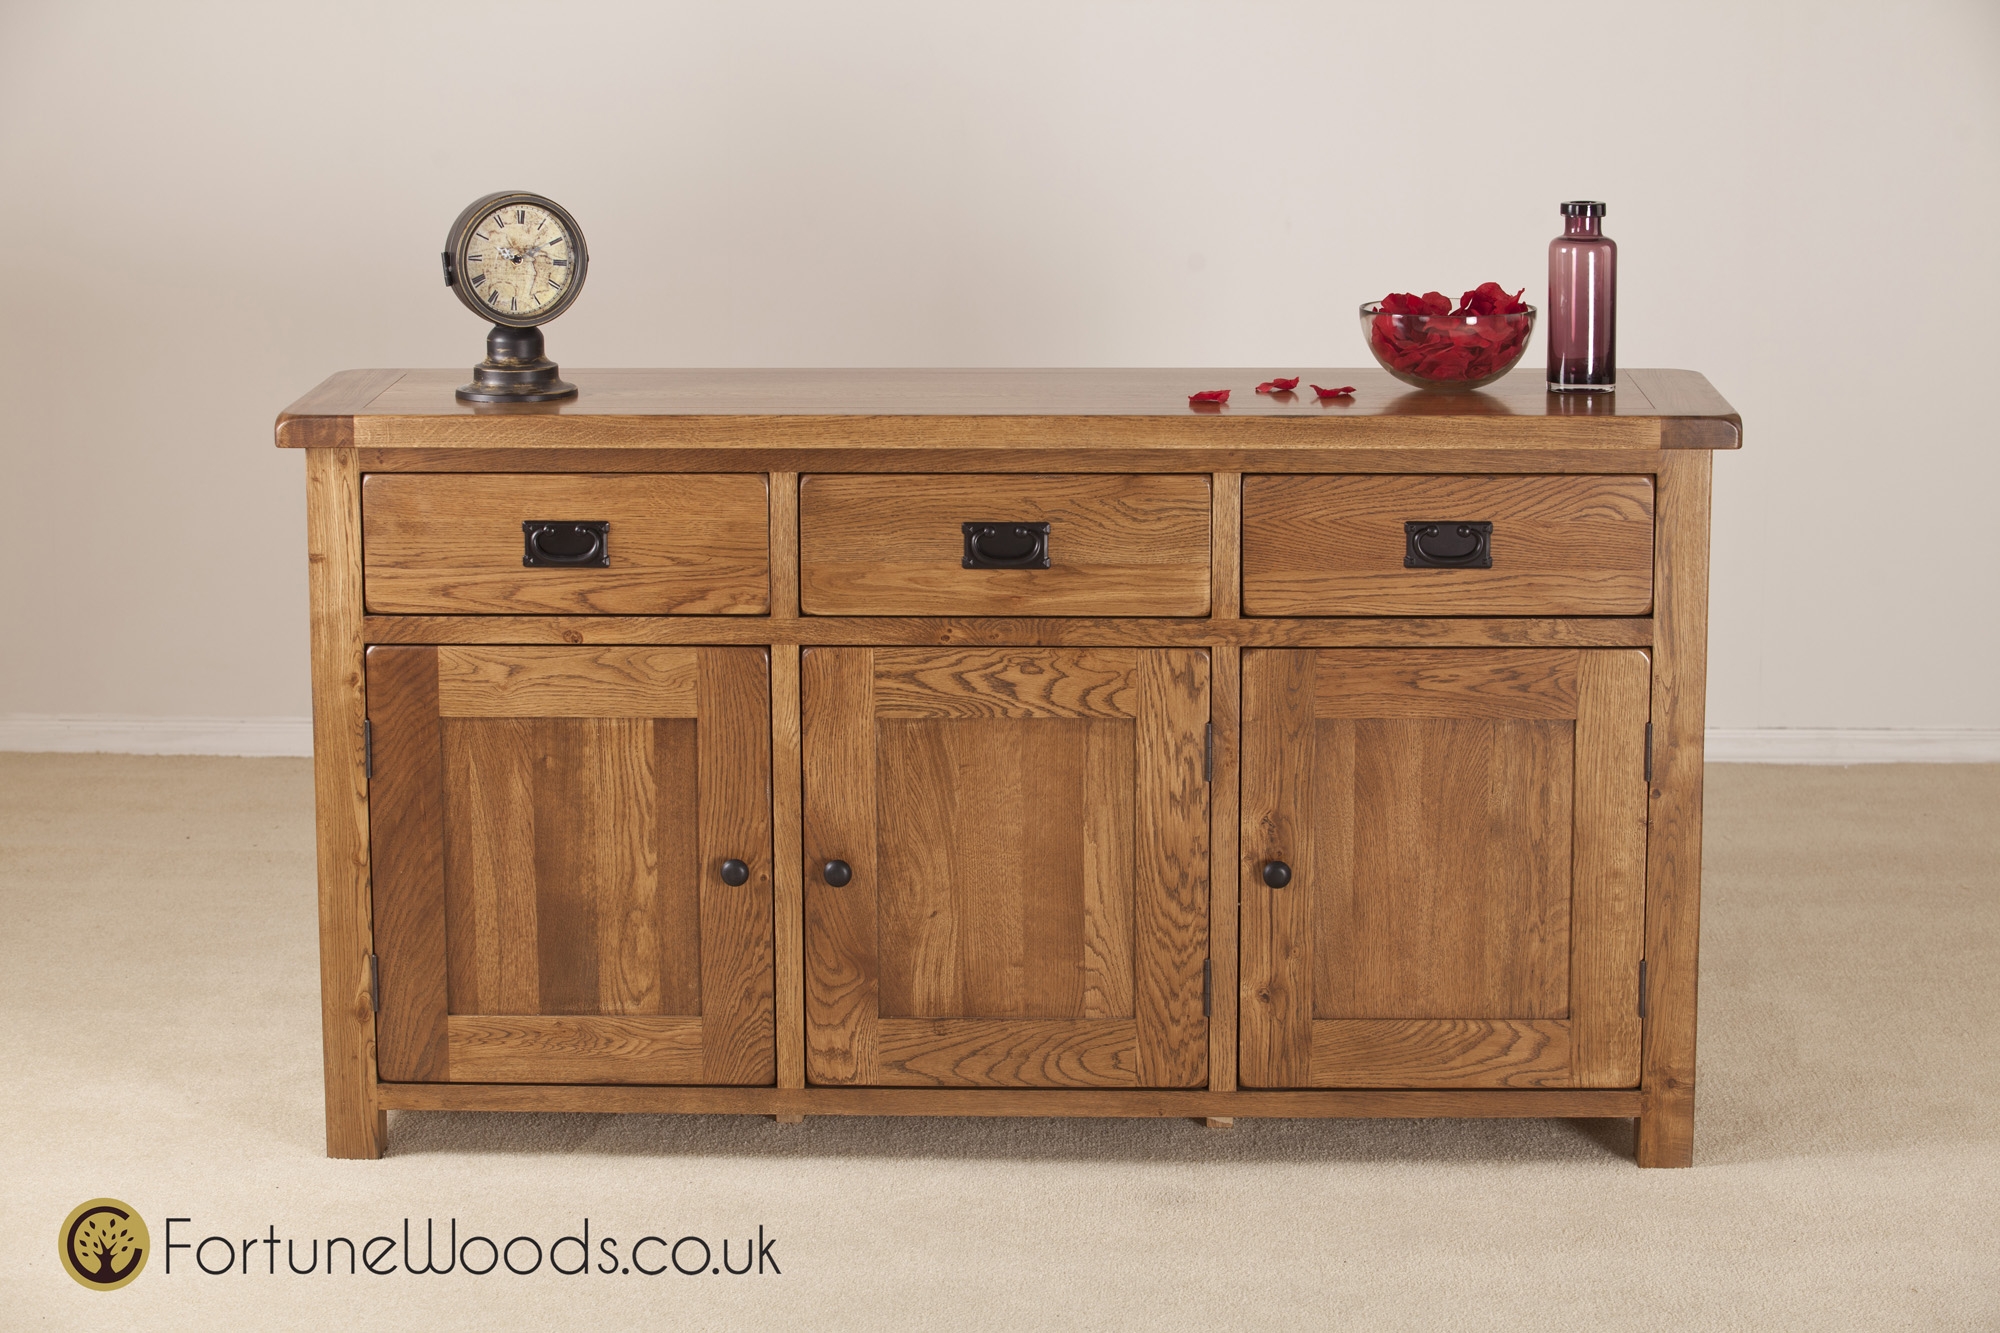 Fortune Woods Rustic Large Sideboard